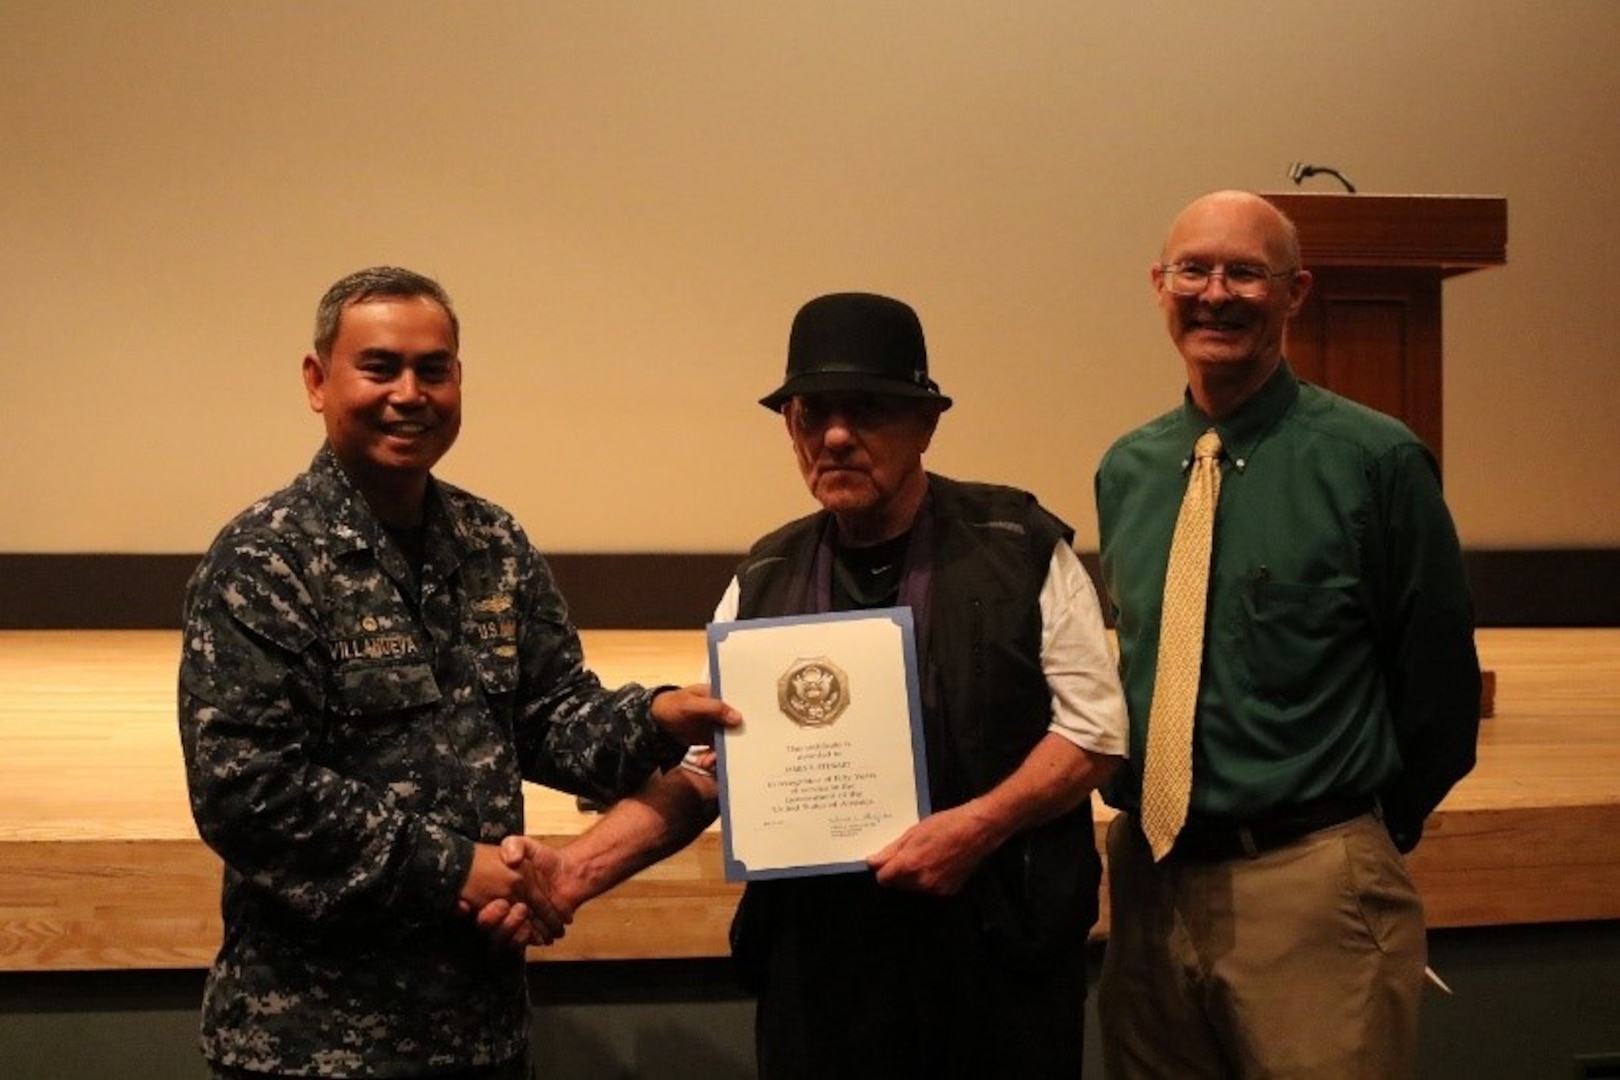 James Stewart, center, Receiving Branch materiel handler, is presented a 50-year Federal service certificate, pin and letter on behalf of the DLA Director by DLA Distribution Yokosuka, Japan, commanding officer Cmdr. Nolasco Villanueva, left, and deputy commander Roy Jewell.